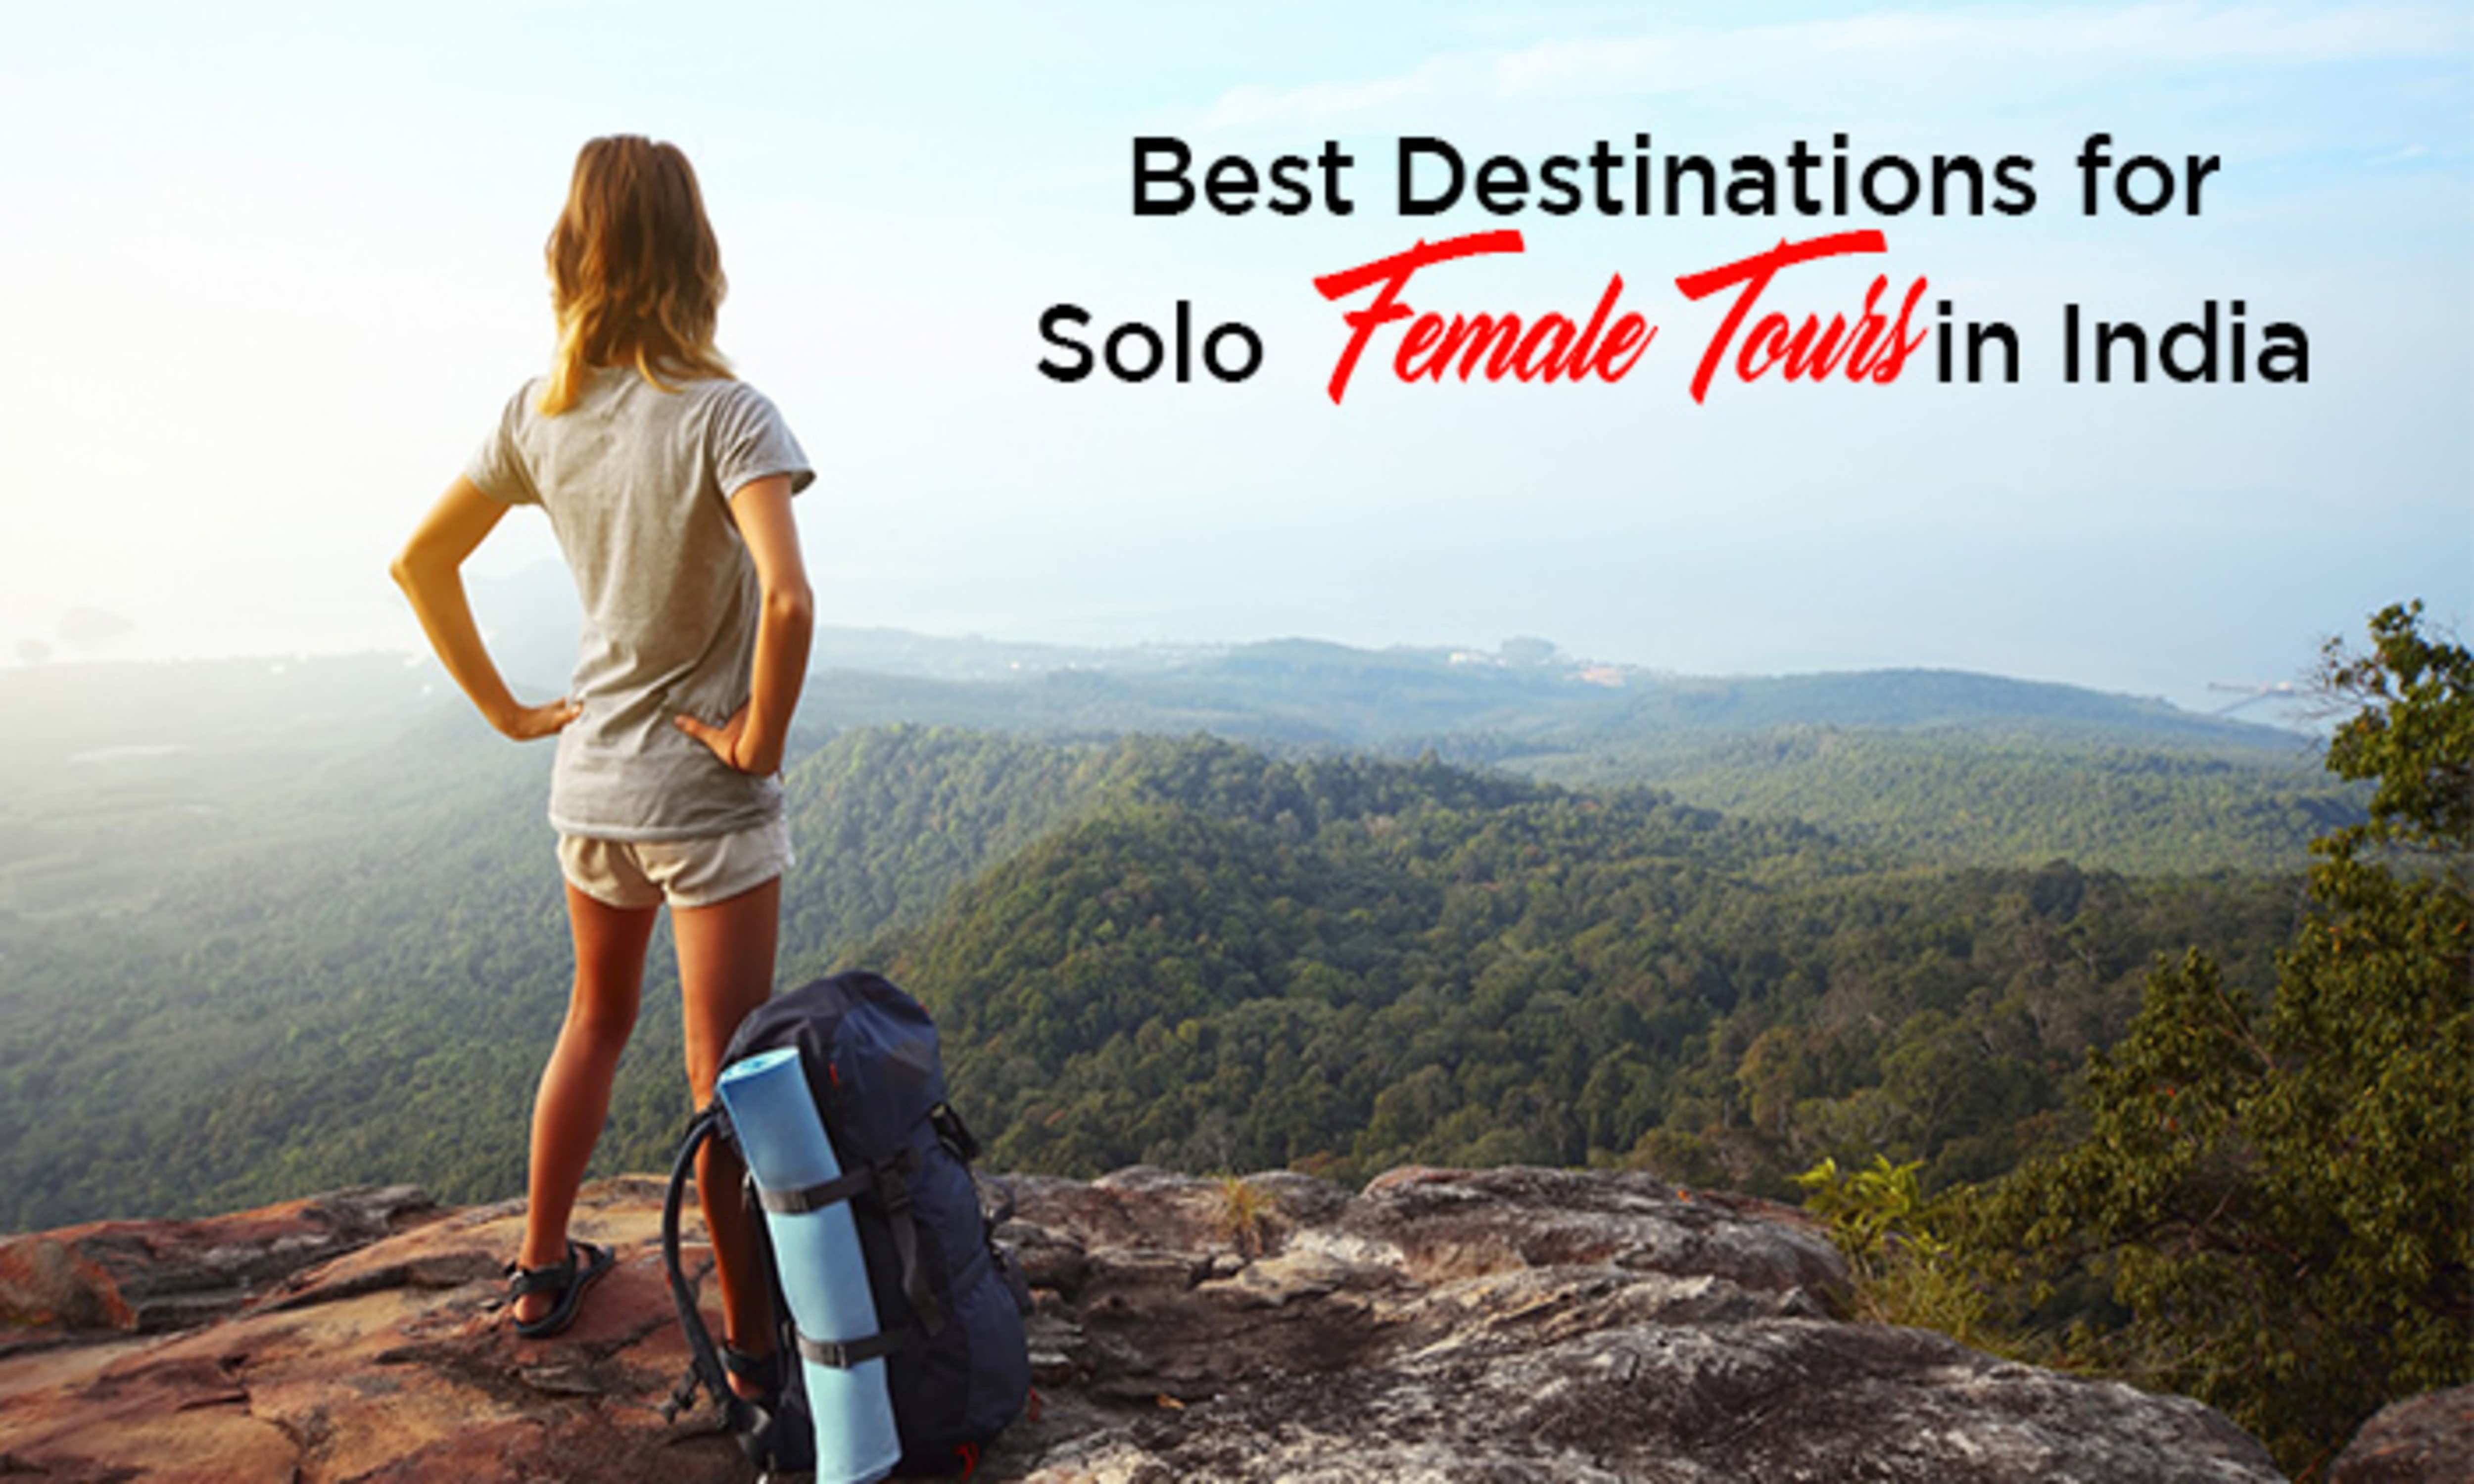 Solo female travel packages